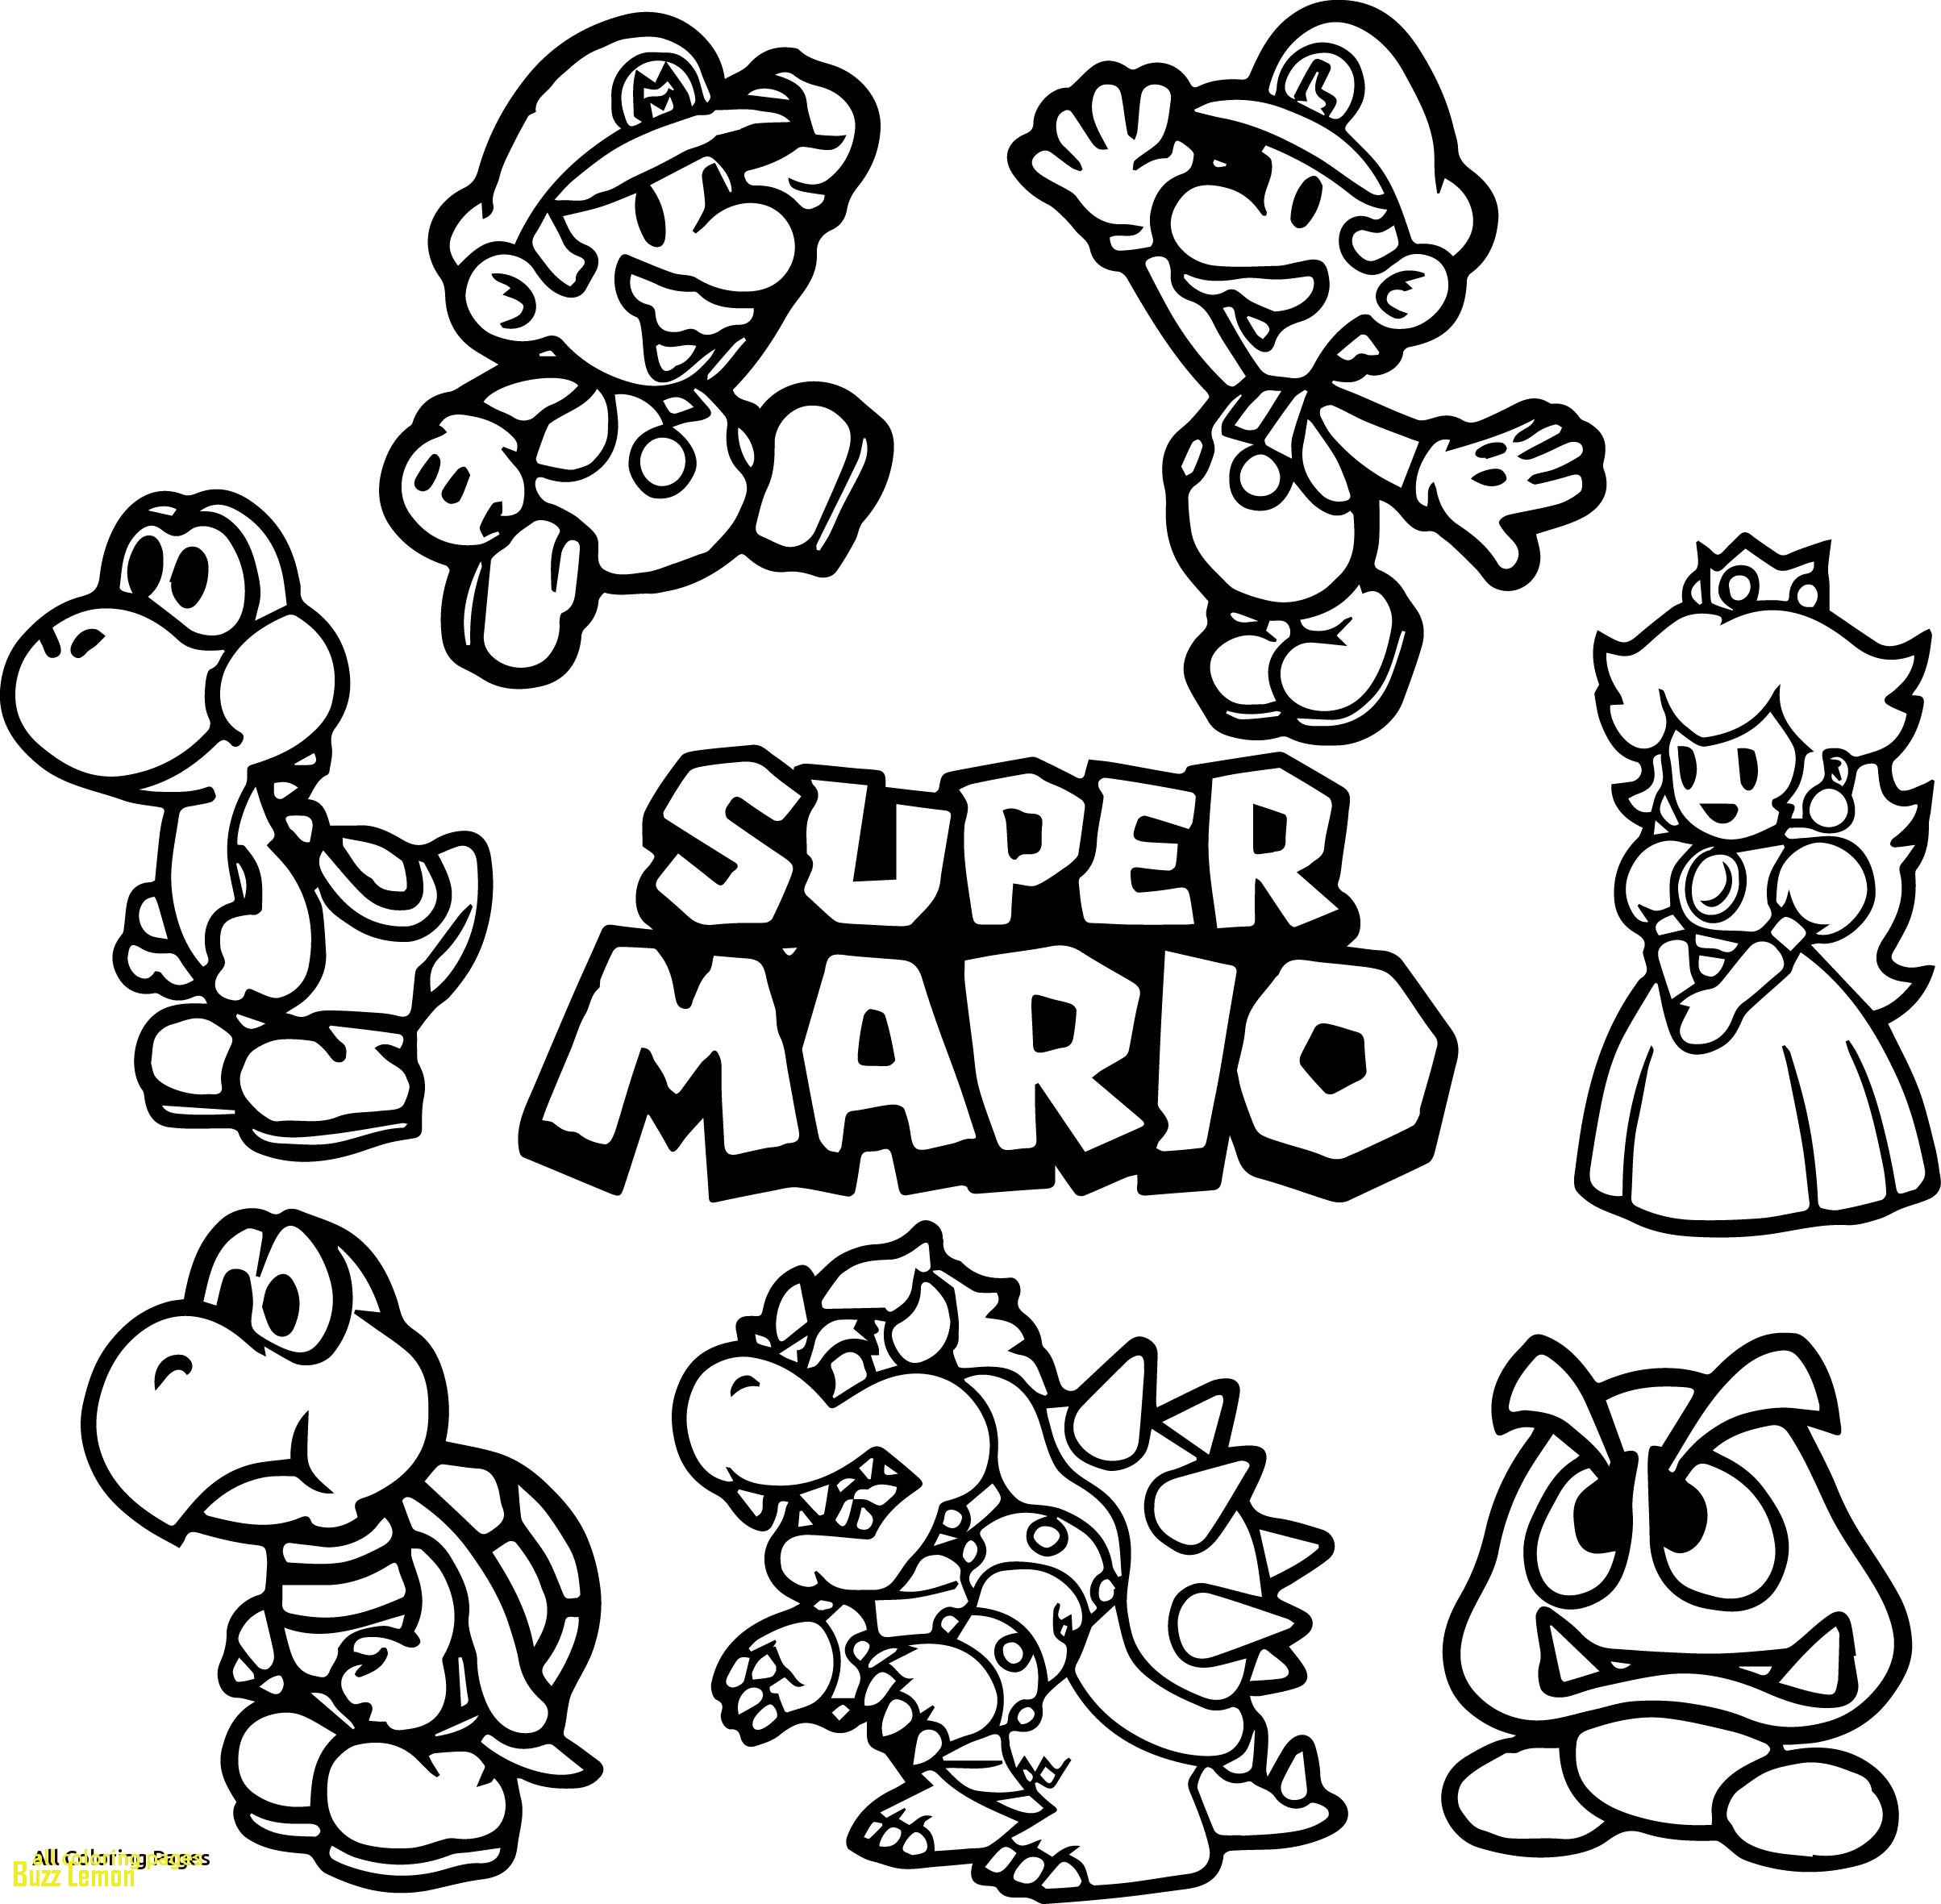 Super Mario Toad Coloring Pages at GetColorings.com | Free printable